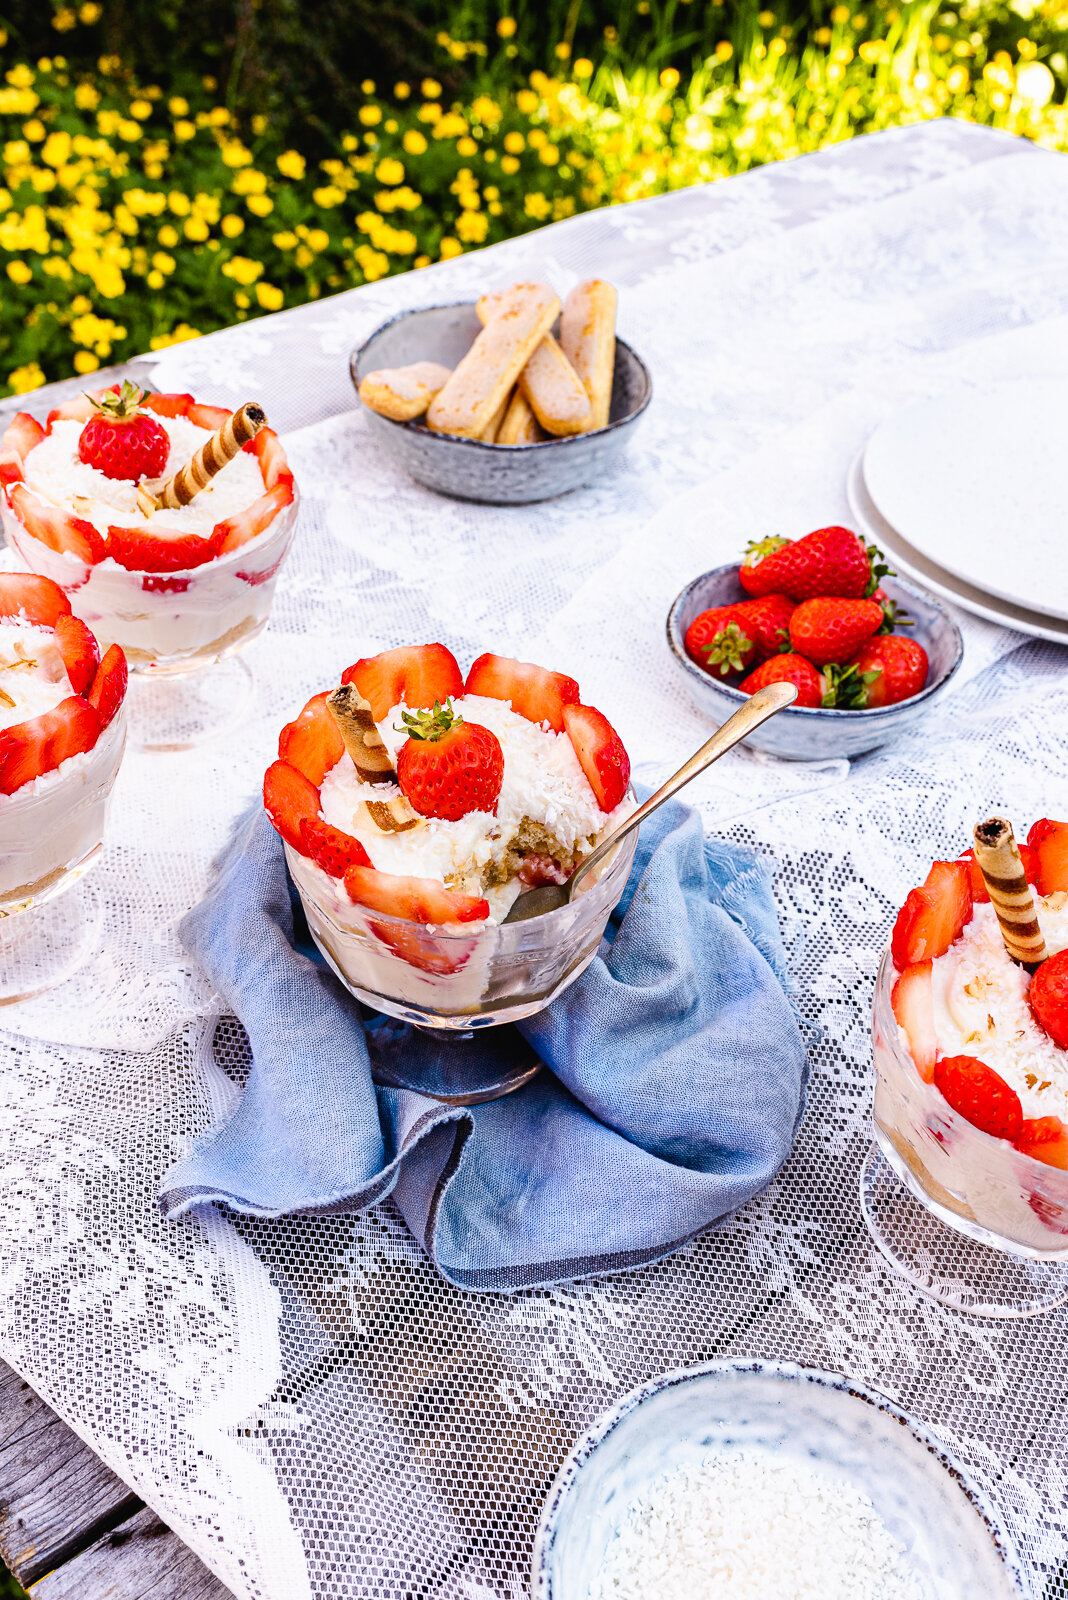 Recipe for Strawberry and Coconut Rum Tiramisu - perfect for a garden party this summer